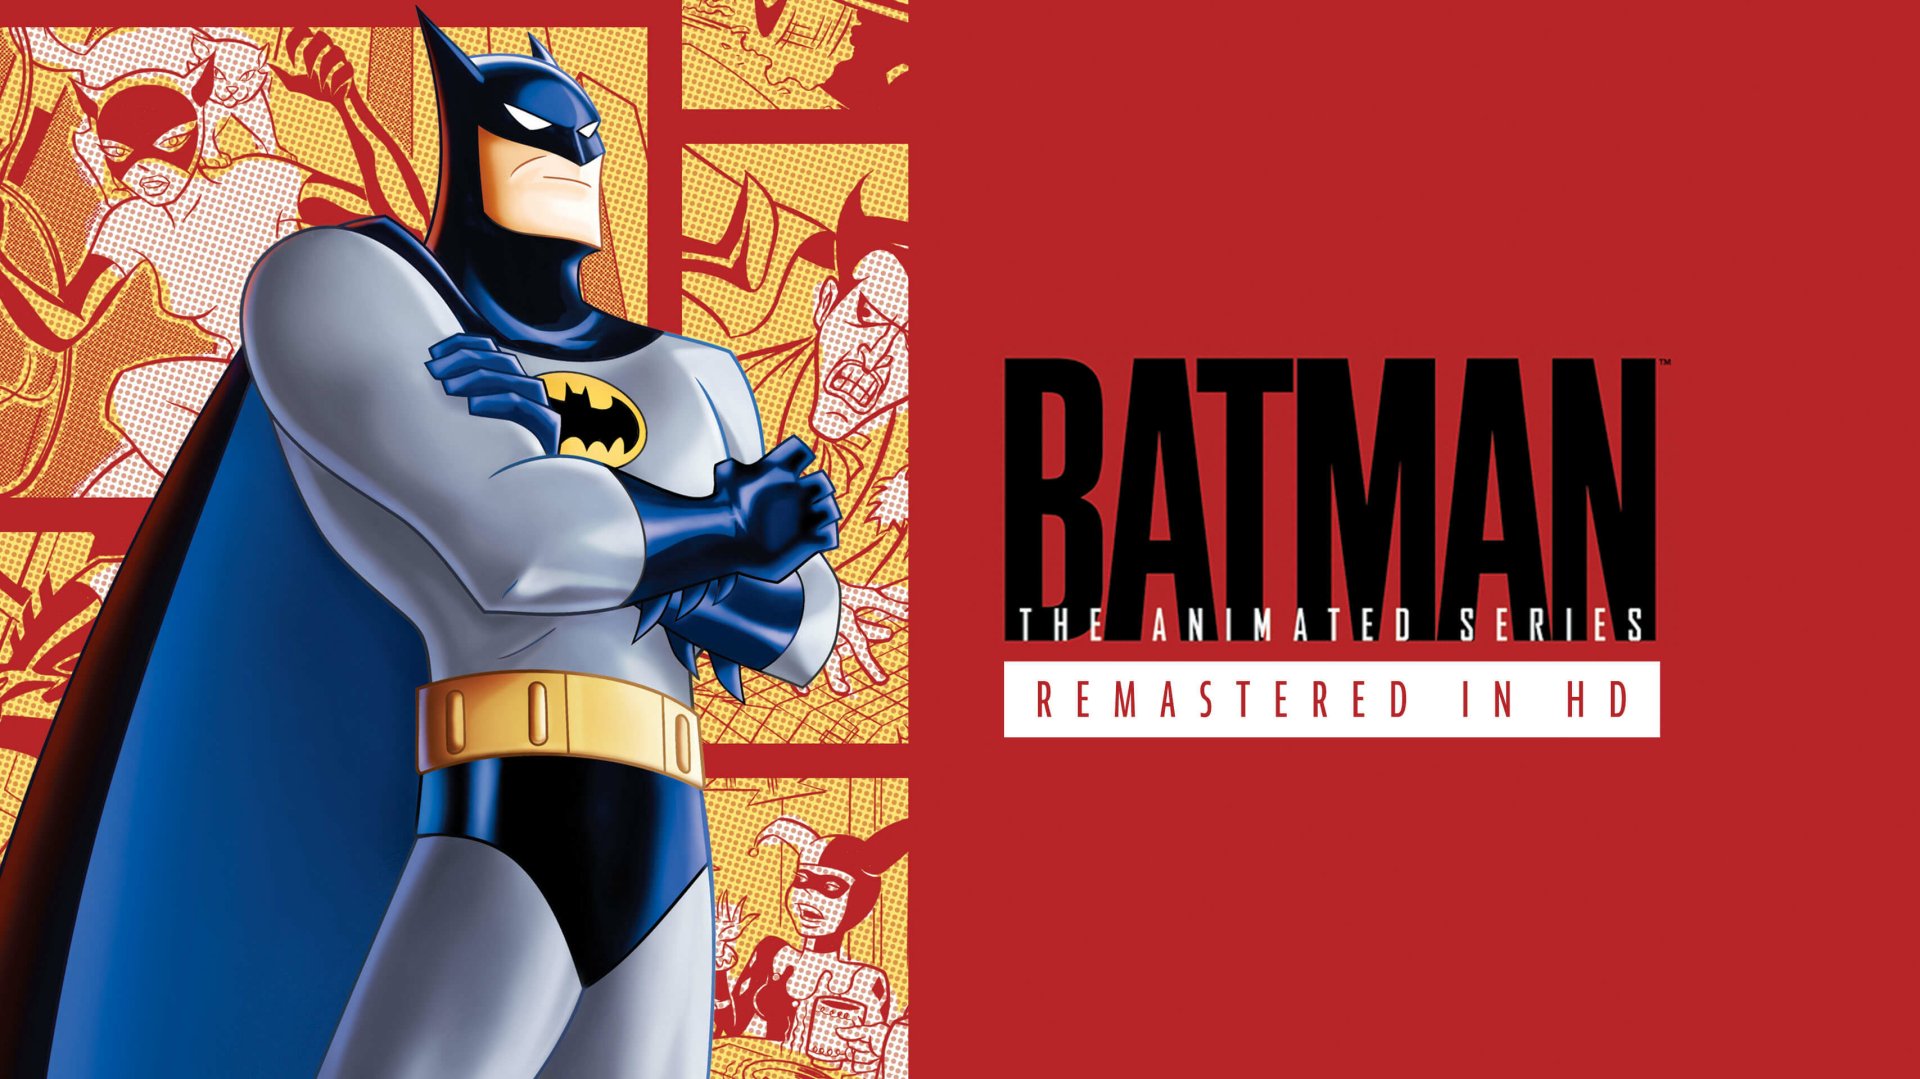 Batman The Animated Series Hd Wallpaper Background Image 3415x1920